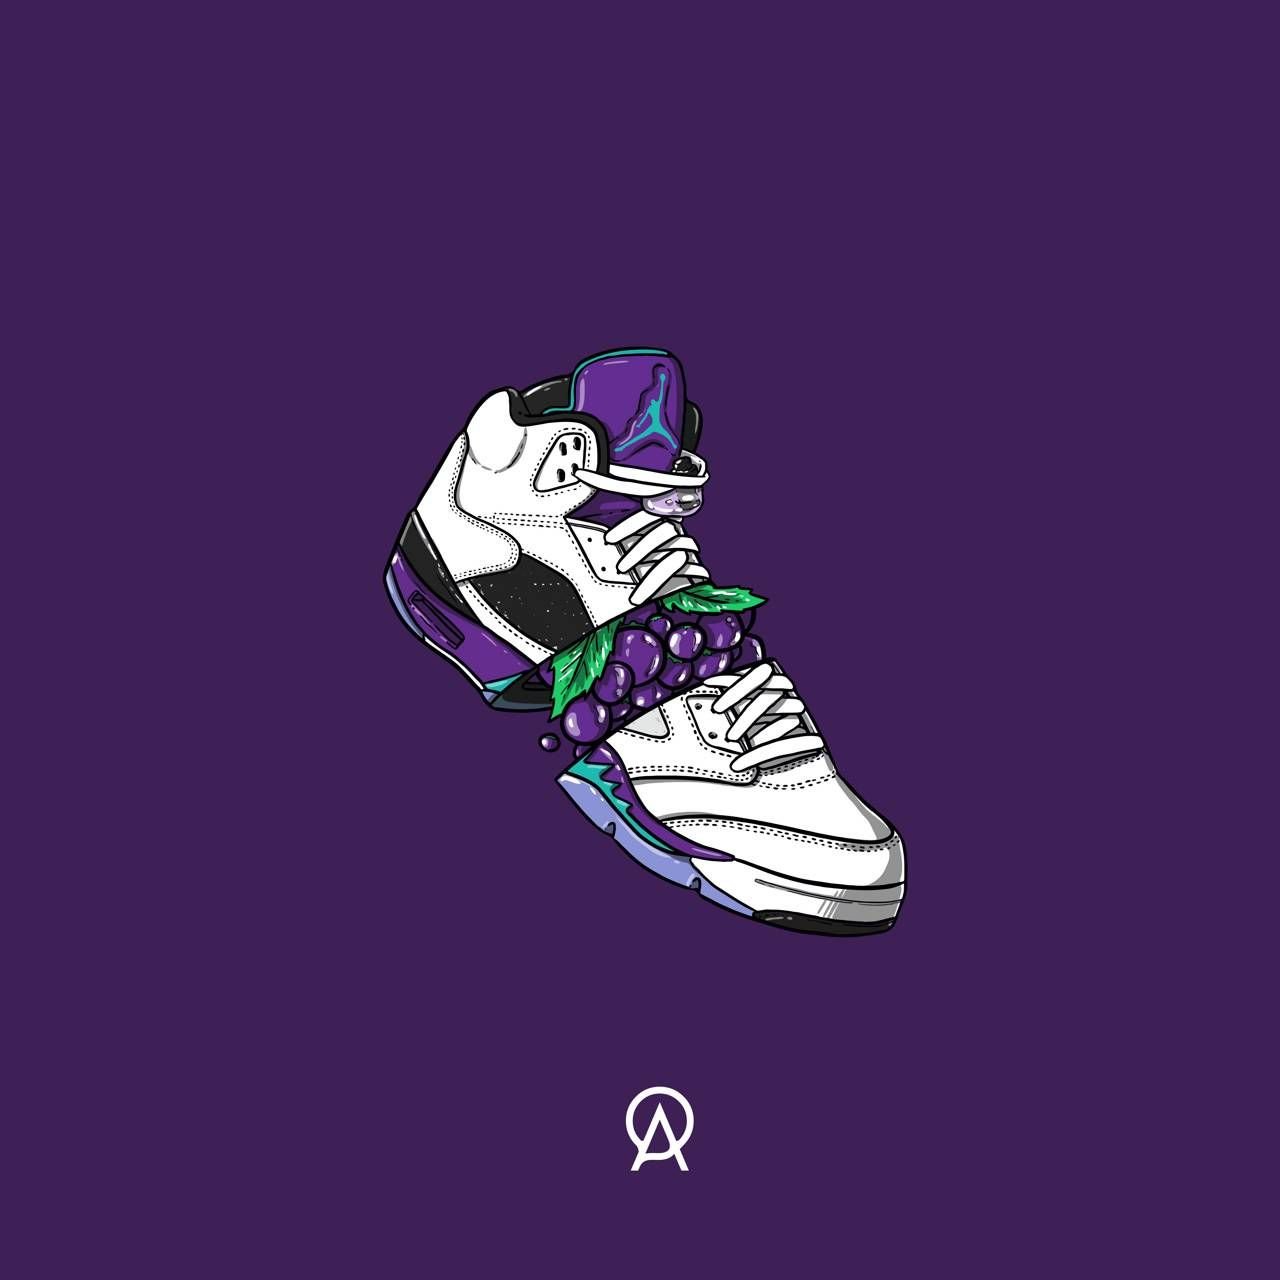 Download A Purple And White Air Jordan 1 Is Flying In The Sky Wallpaper   Wallpaperscom